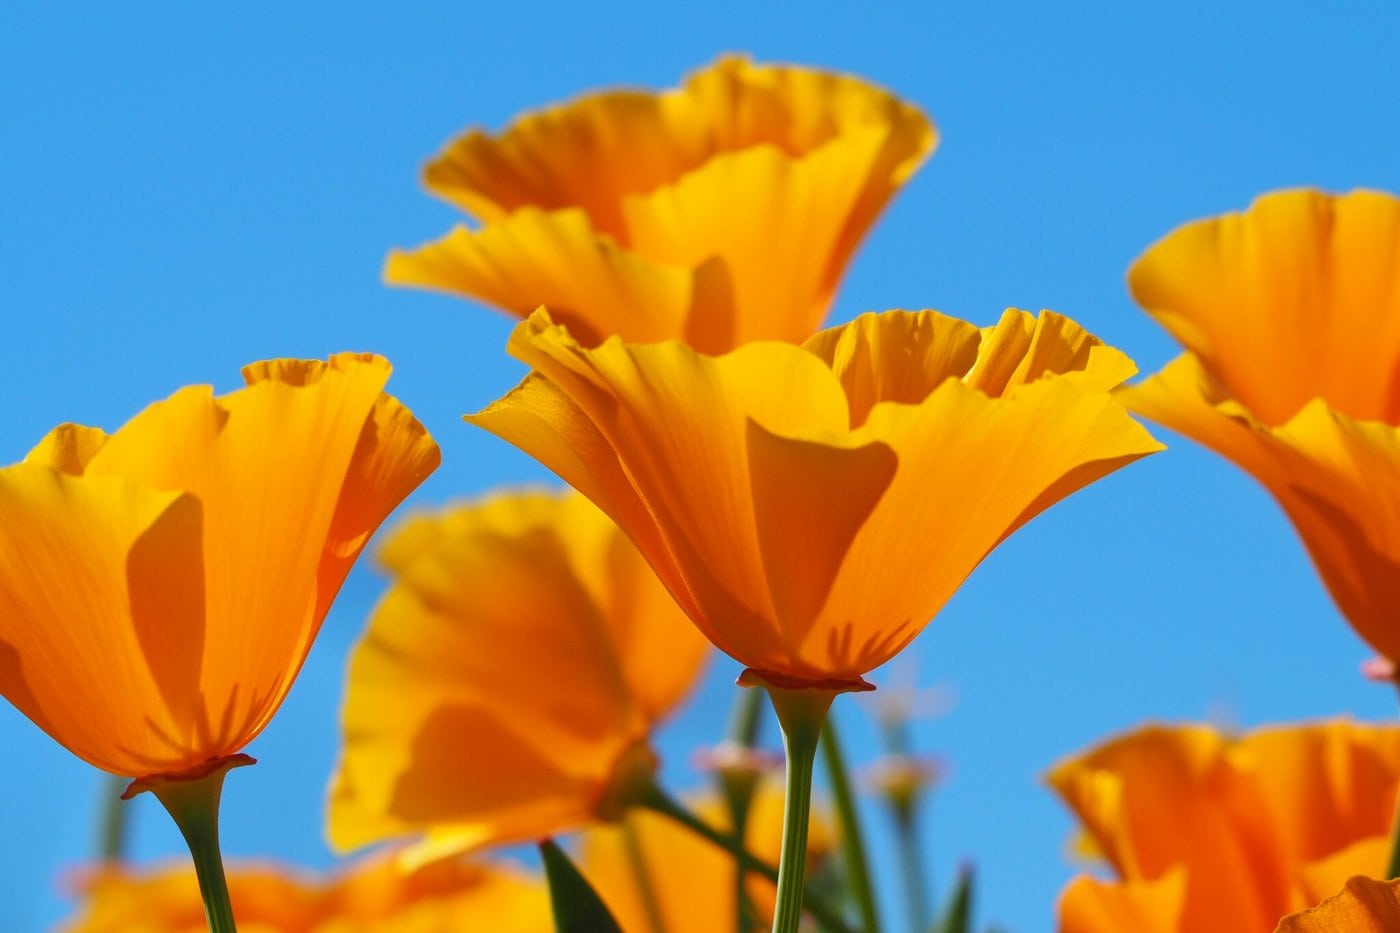 Is It Really Illegal To Pick A California Poppy